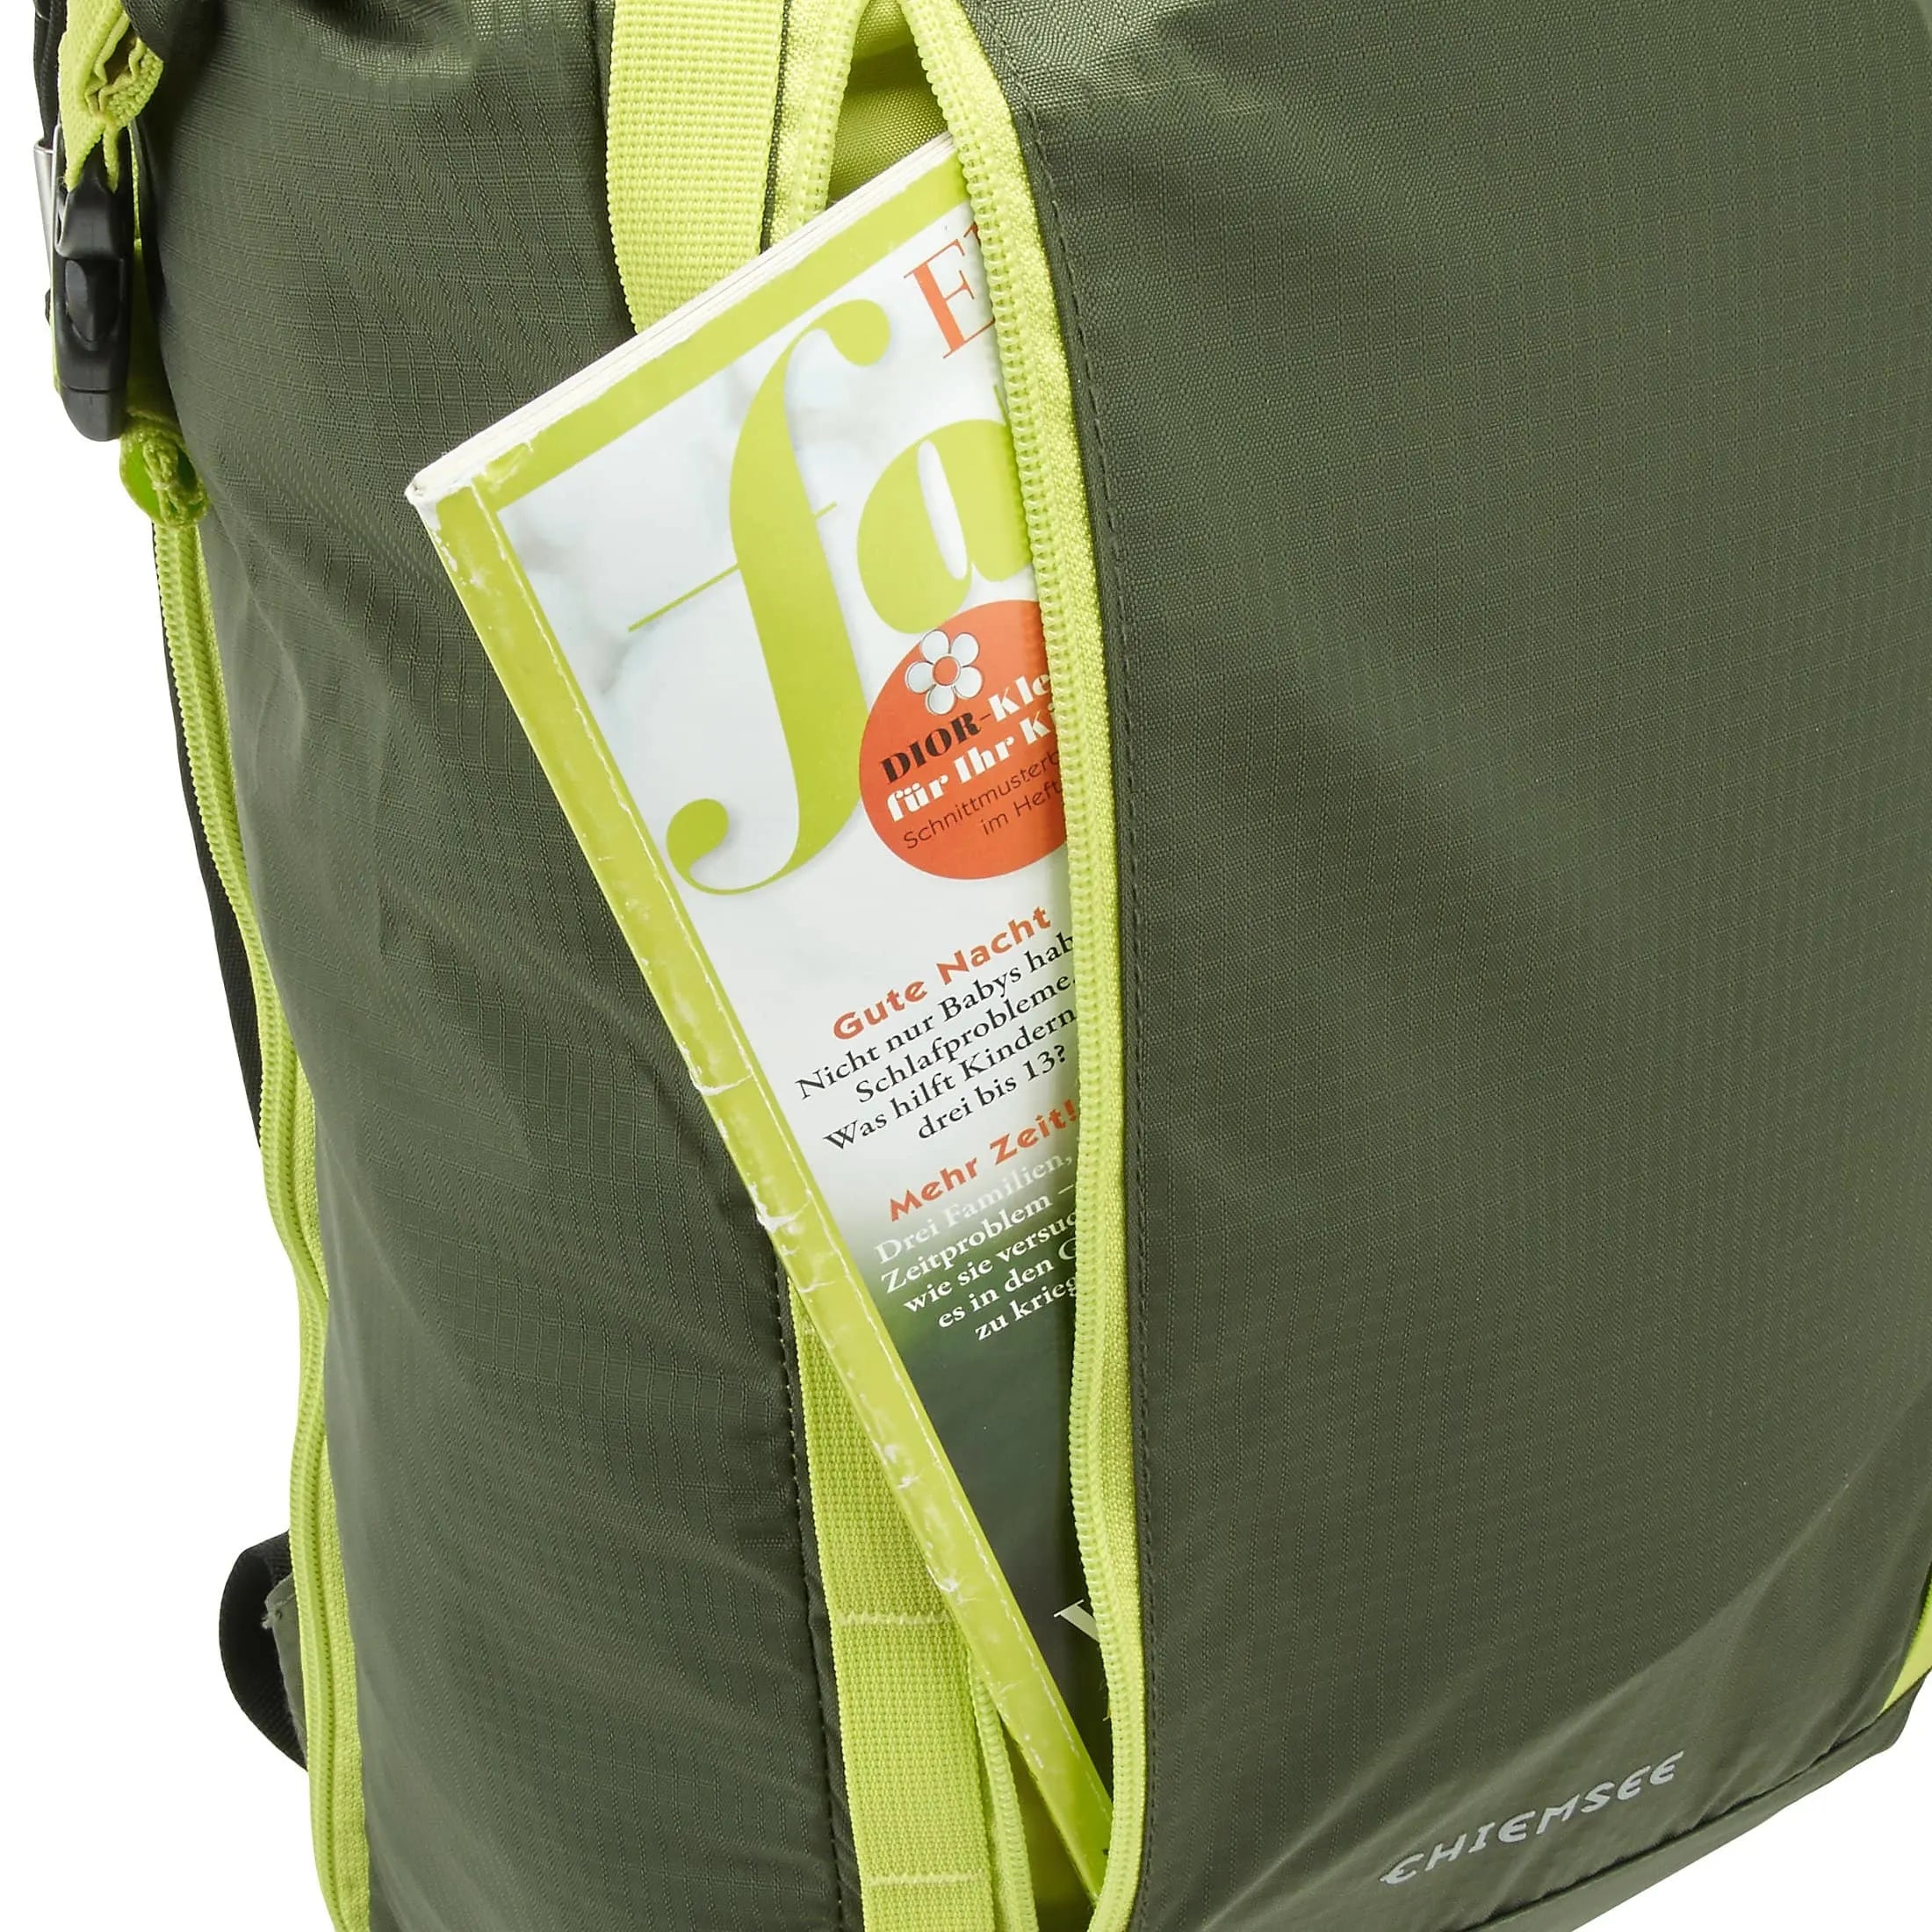 Chiemsee Sports & Travel Bags Daypack Rucksack 50 cm - dusty olive